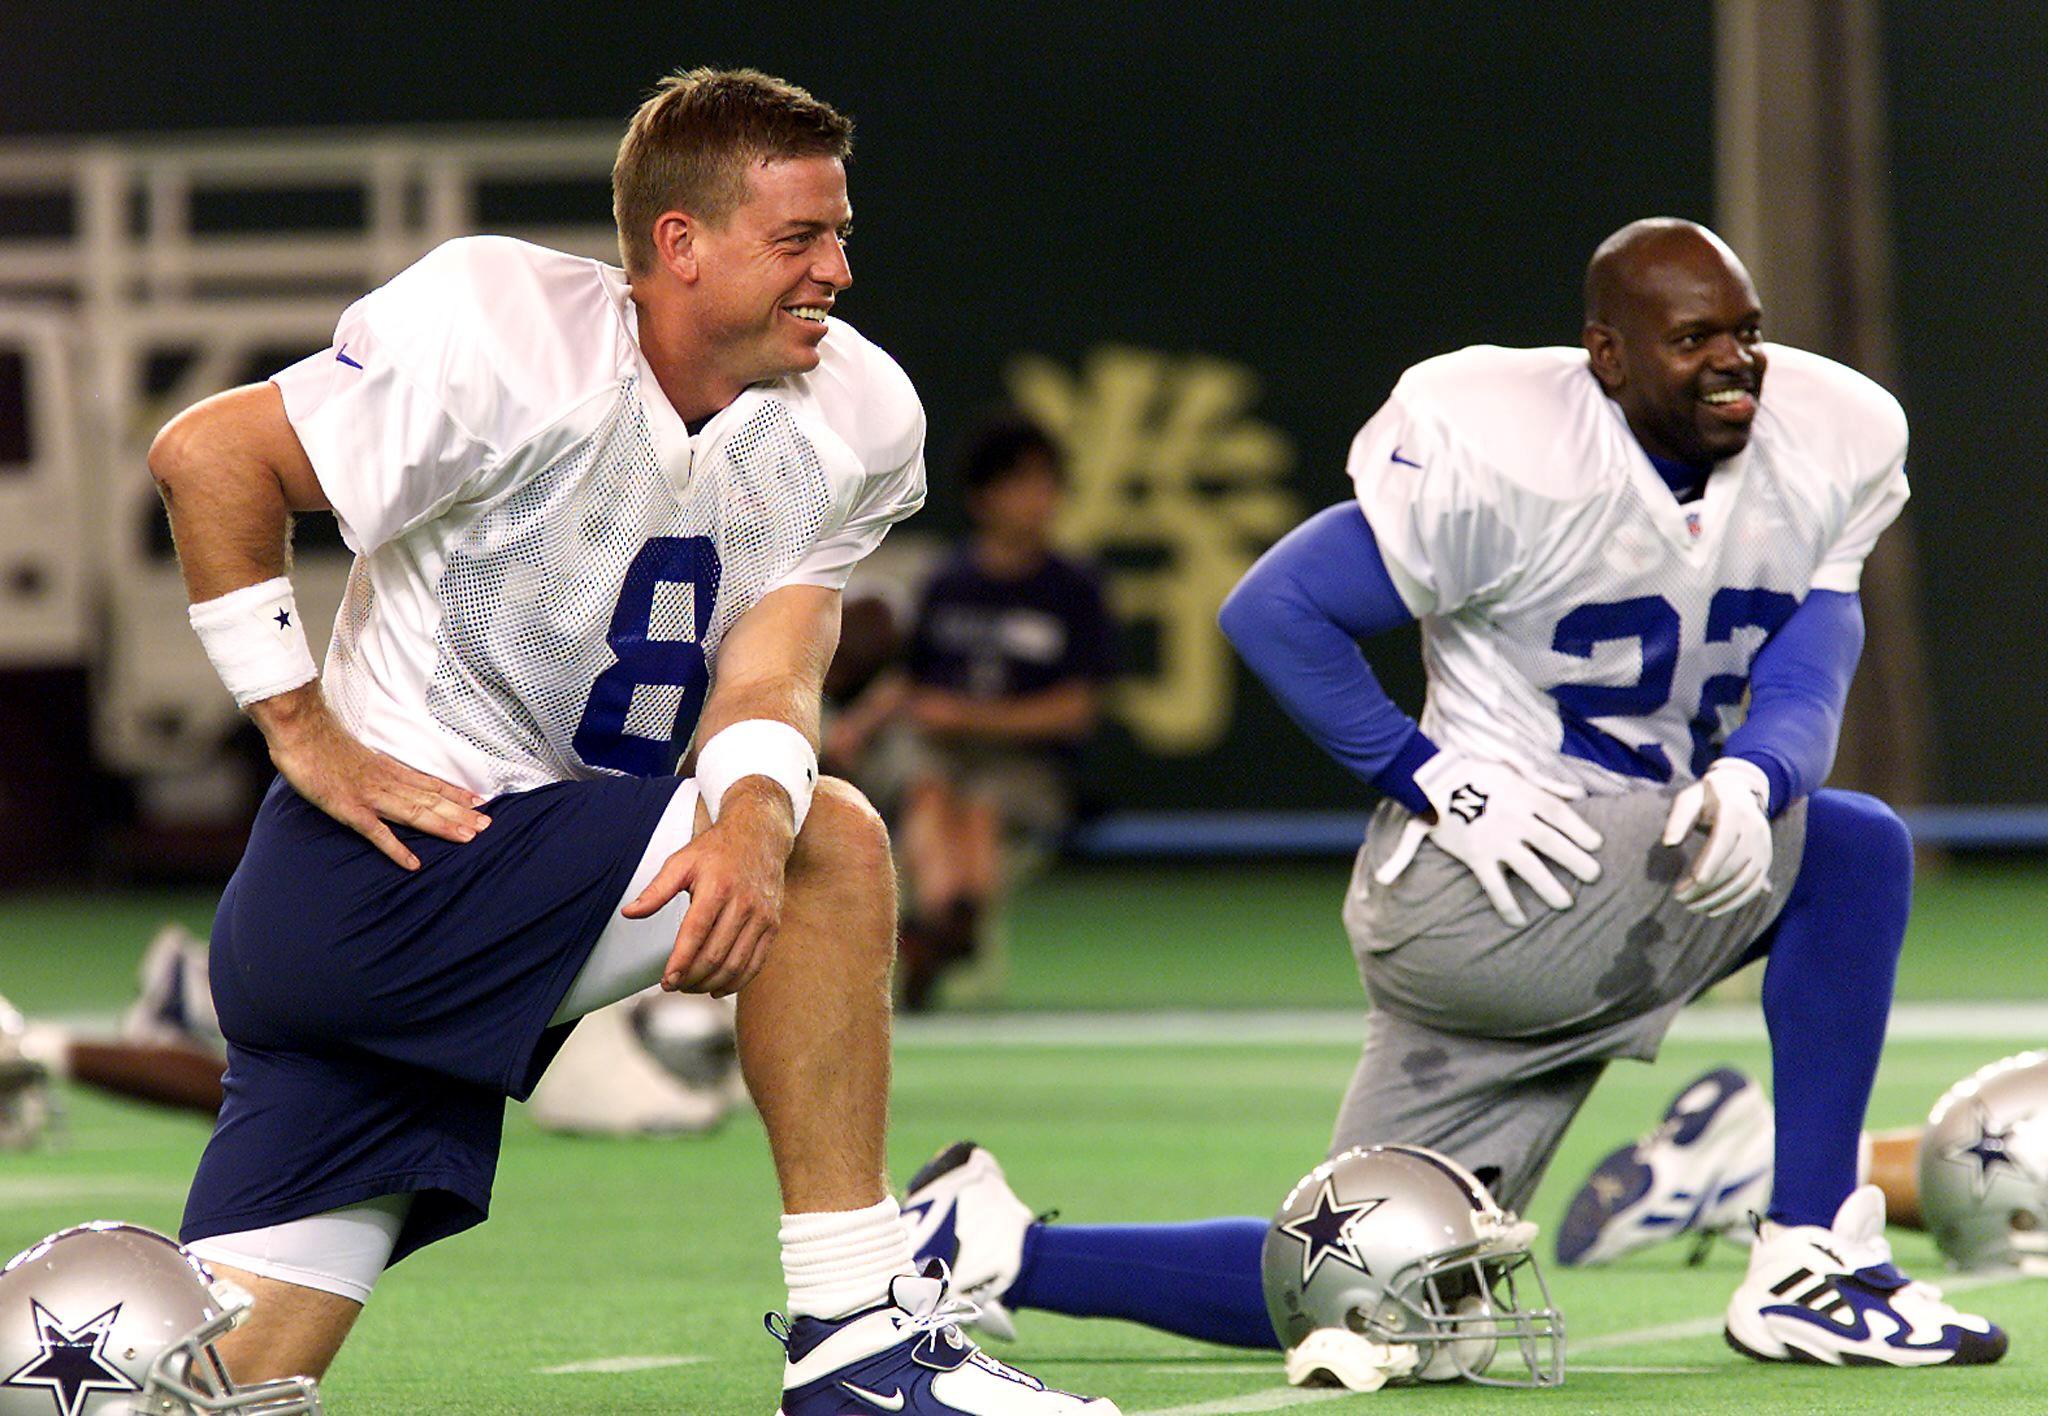 Troy Aikman and Emmitt Smith might be the greatest Cowboys of all time, but they aren't the highest-paid players in franchise history.